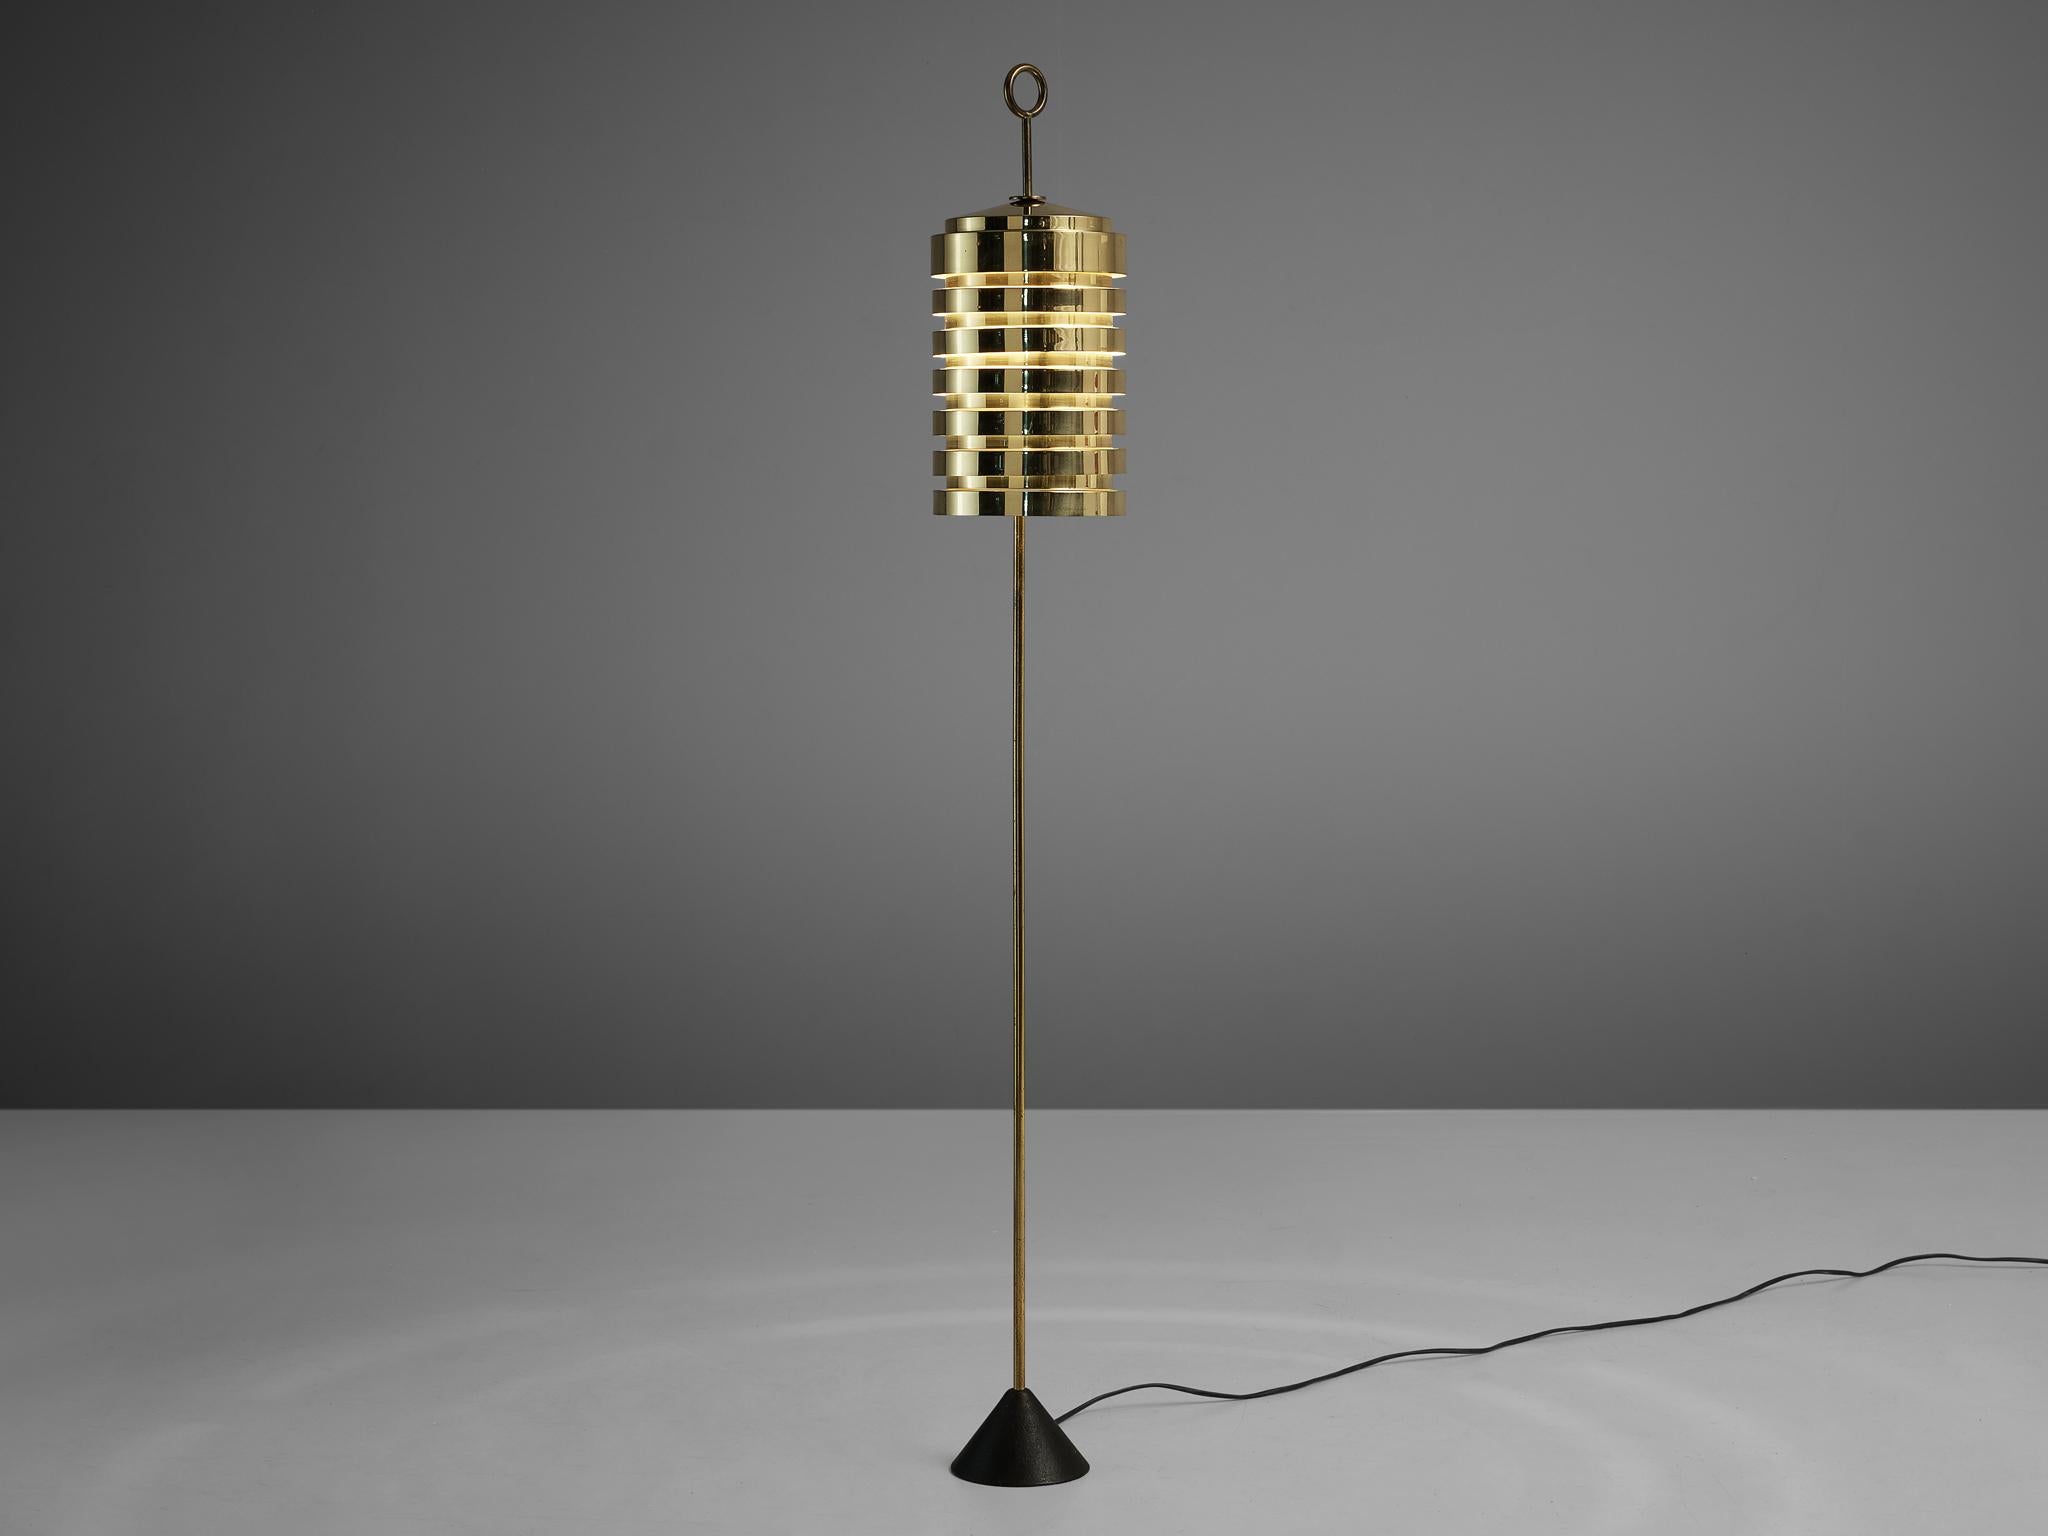 Hans-Agne Jakobsson for AB Markaryd, floor lamp 'G20', brass, iron, Sweden, 1950s

Floor lamp model ‘G20’ by Swedish designer Hans-Agne Jakobssen. From a small base in cone-shaped iron starts the thin stem. The design of the shade resting on top,